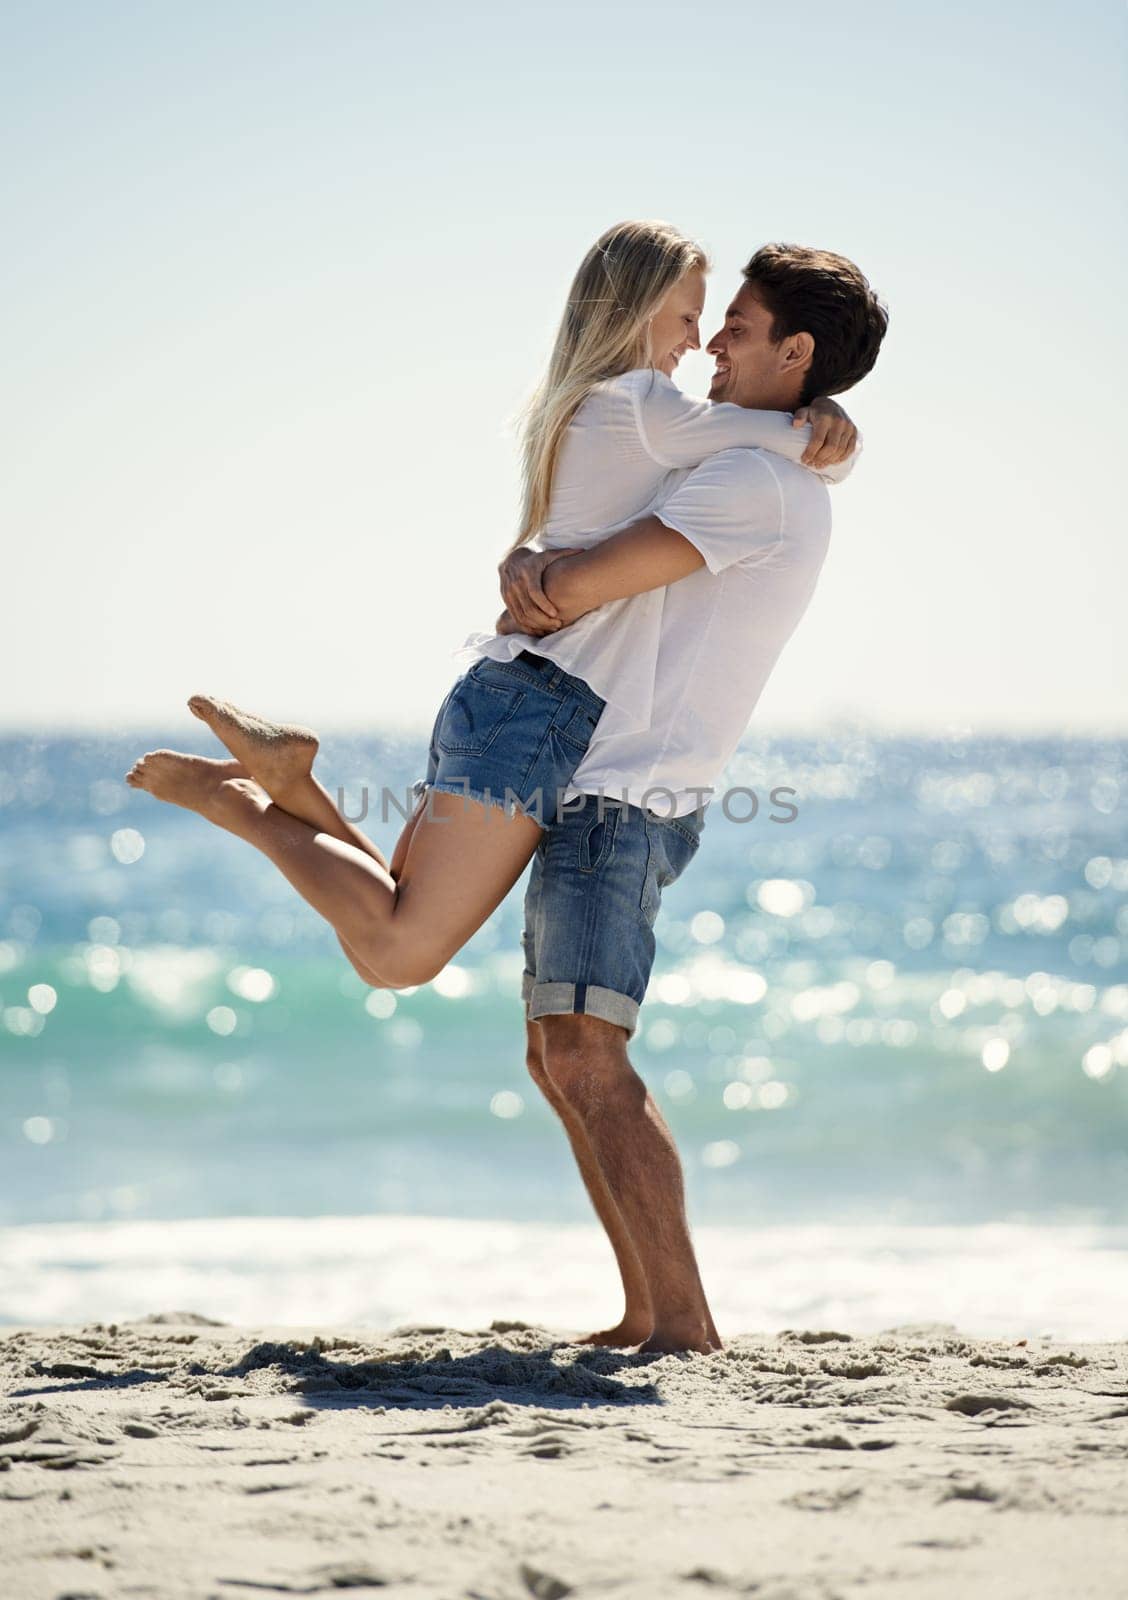 Couple, hug and fun by beach in summer with love, care and support together on a holiday. Happy, vacation and date smile by the sea in Miami with freedom and travel by the ocean on a trip outdoor.